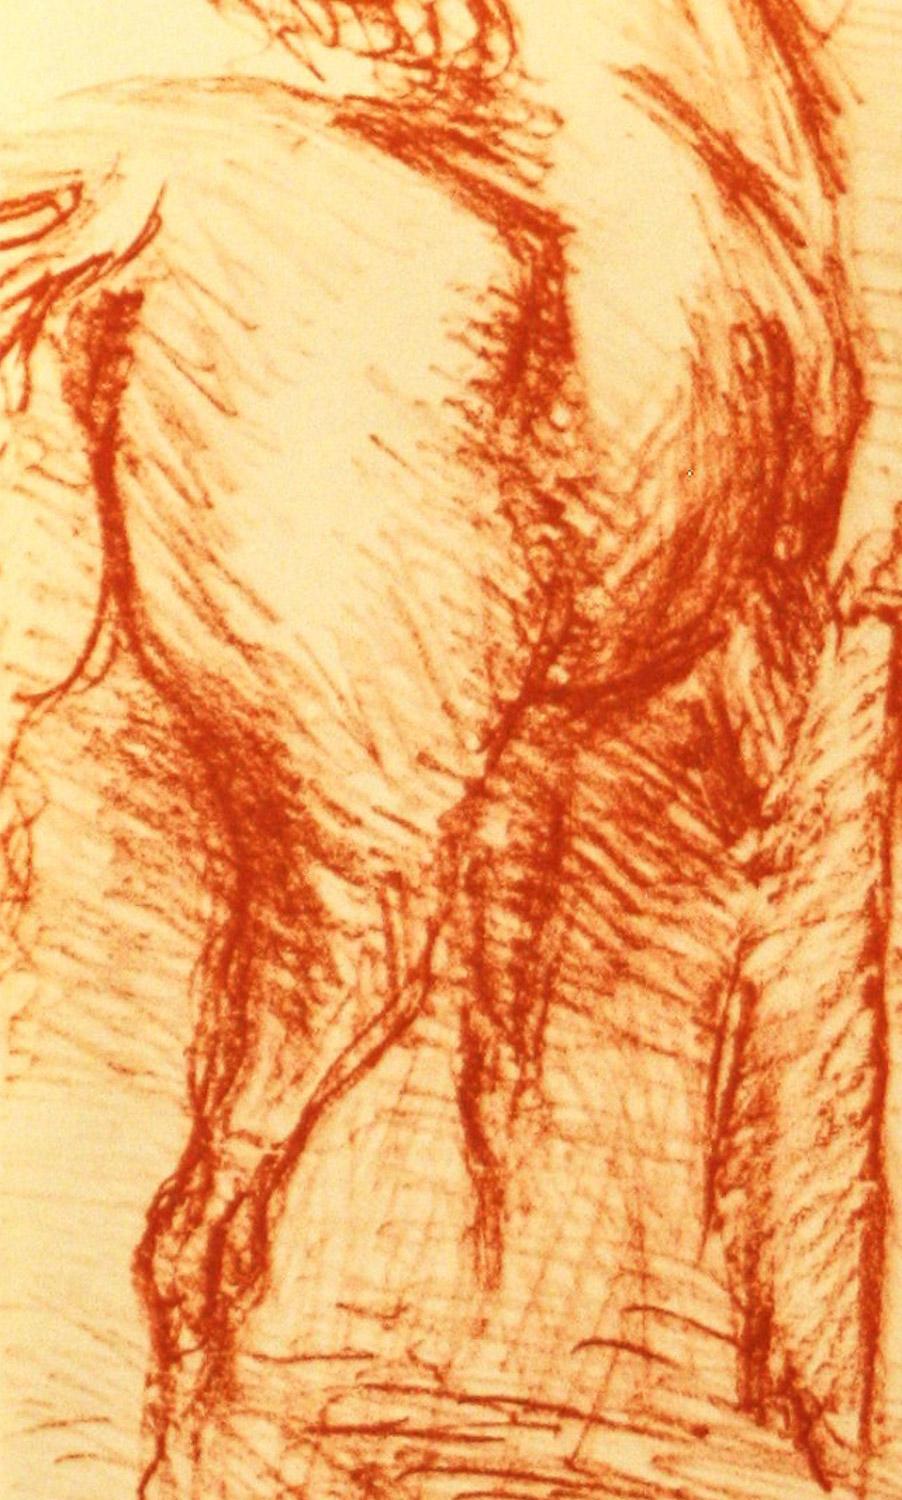 Equestrian Love lithograph by Marcel Vertes - Expressionist Print by Marcel Vertès